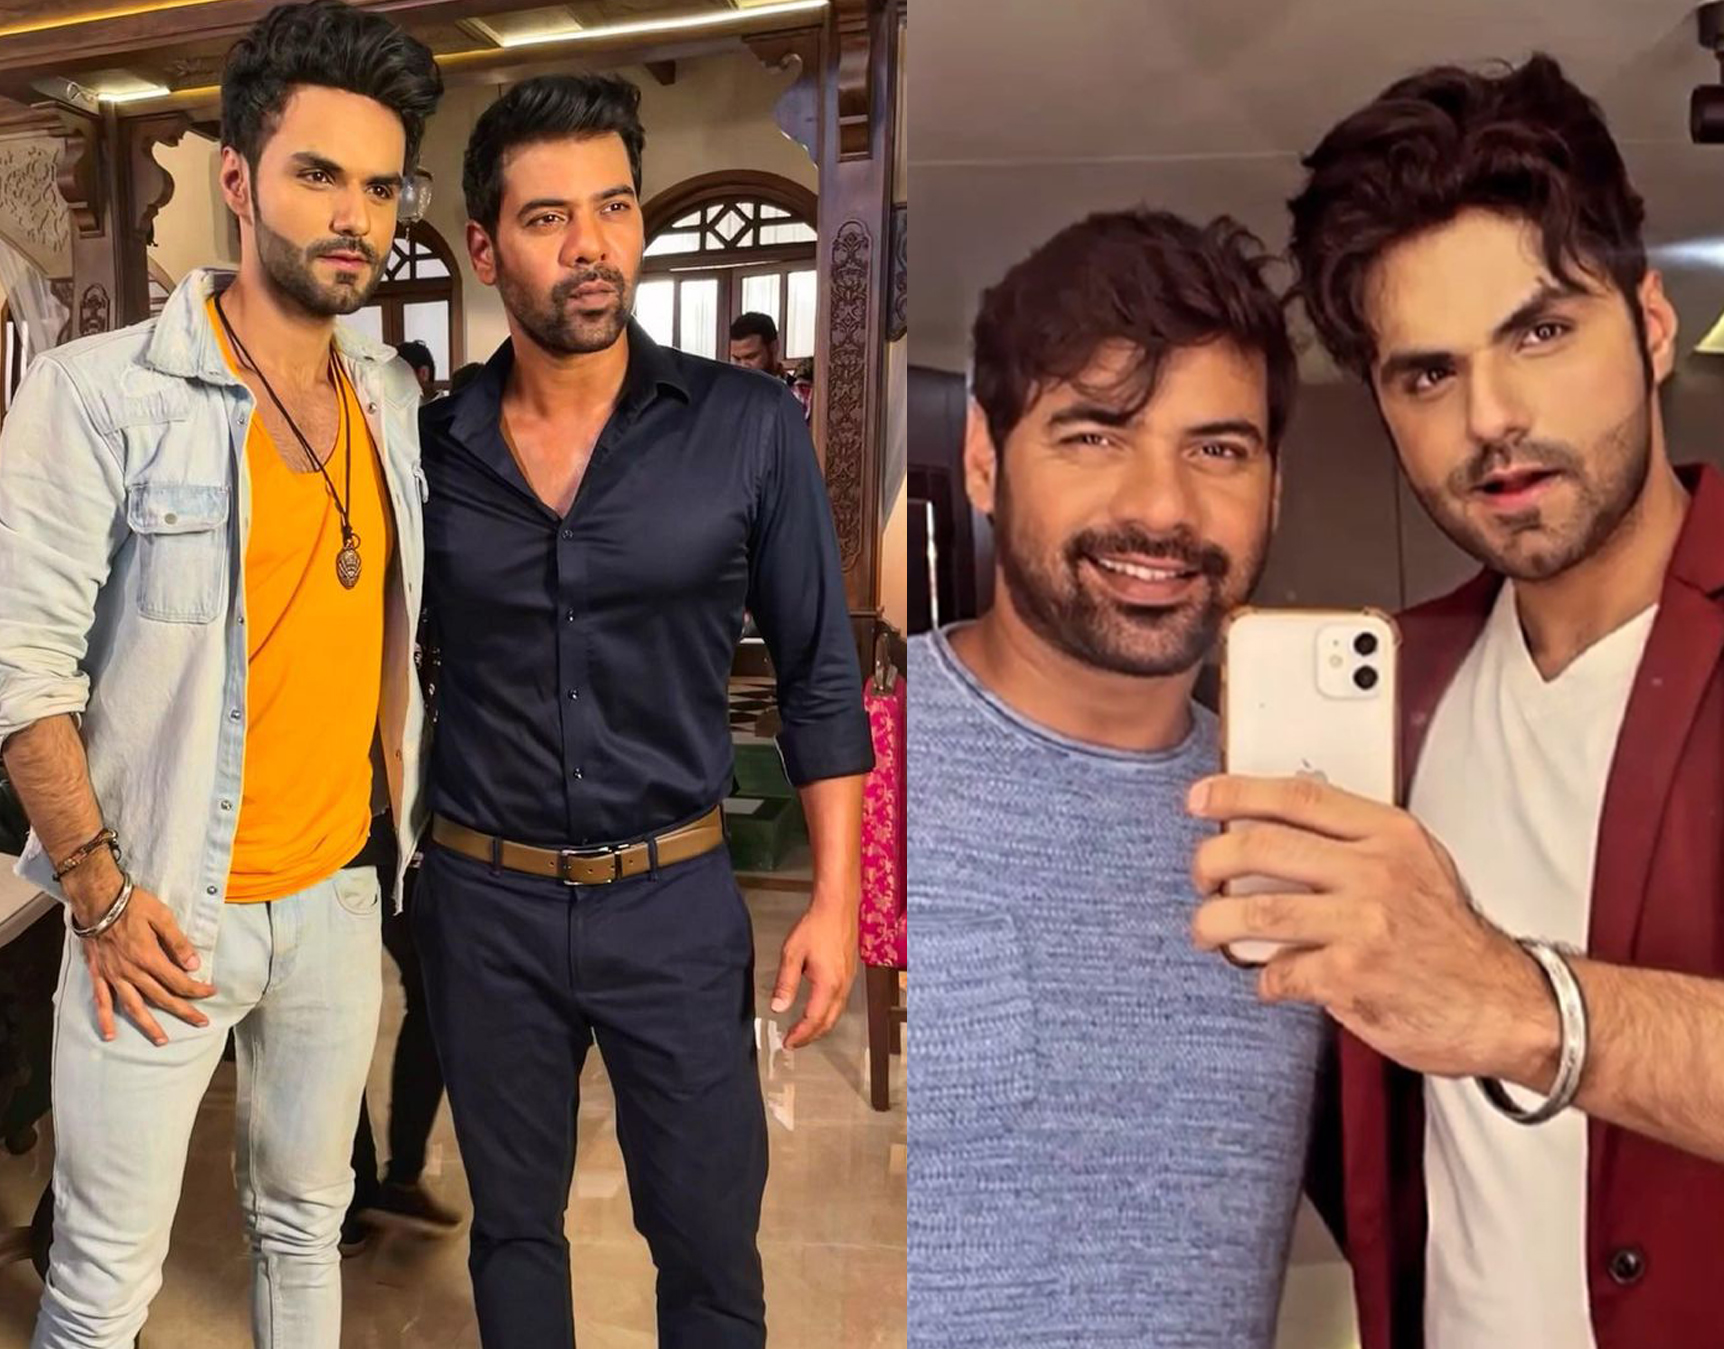 Actor Ranveer Singh Malik Shared About His Co-Star Shabir Ahluwalia. He Said Shabir Is A Gem Of A Person Who Is A Star